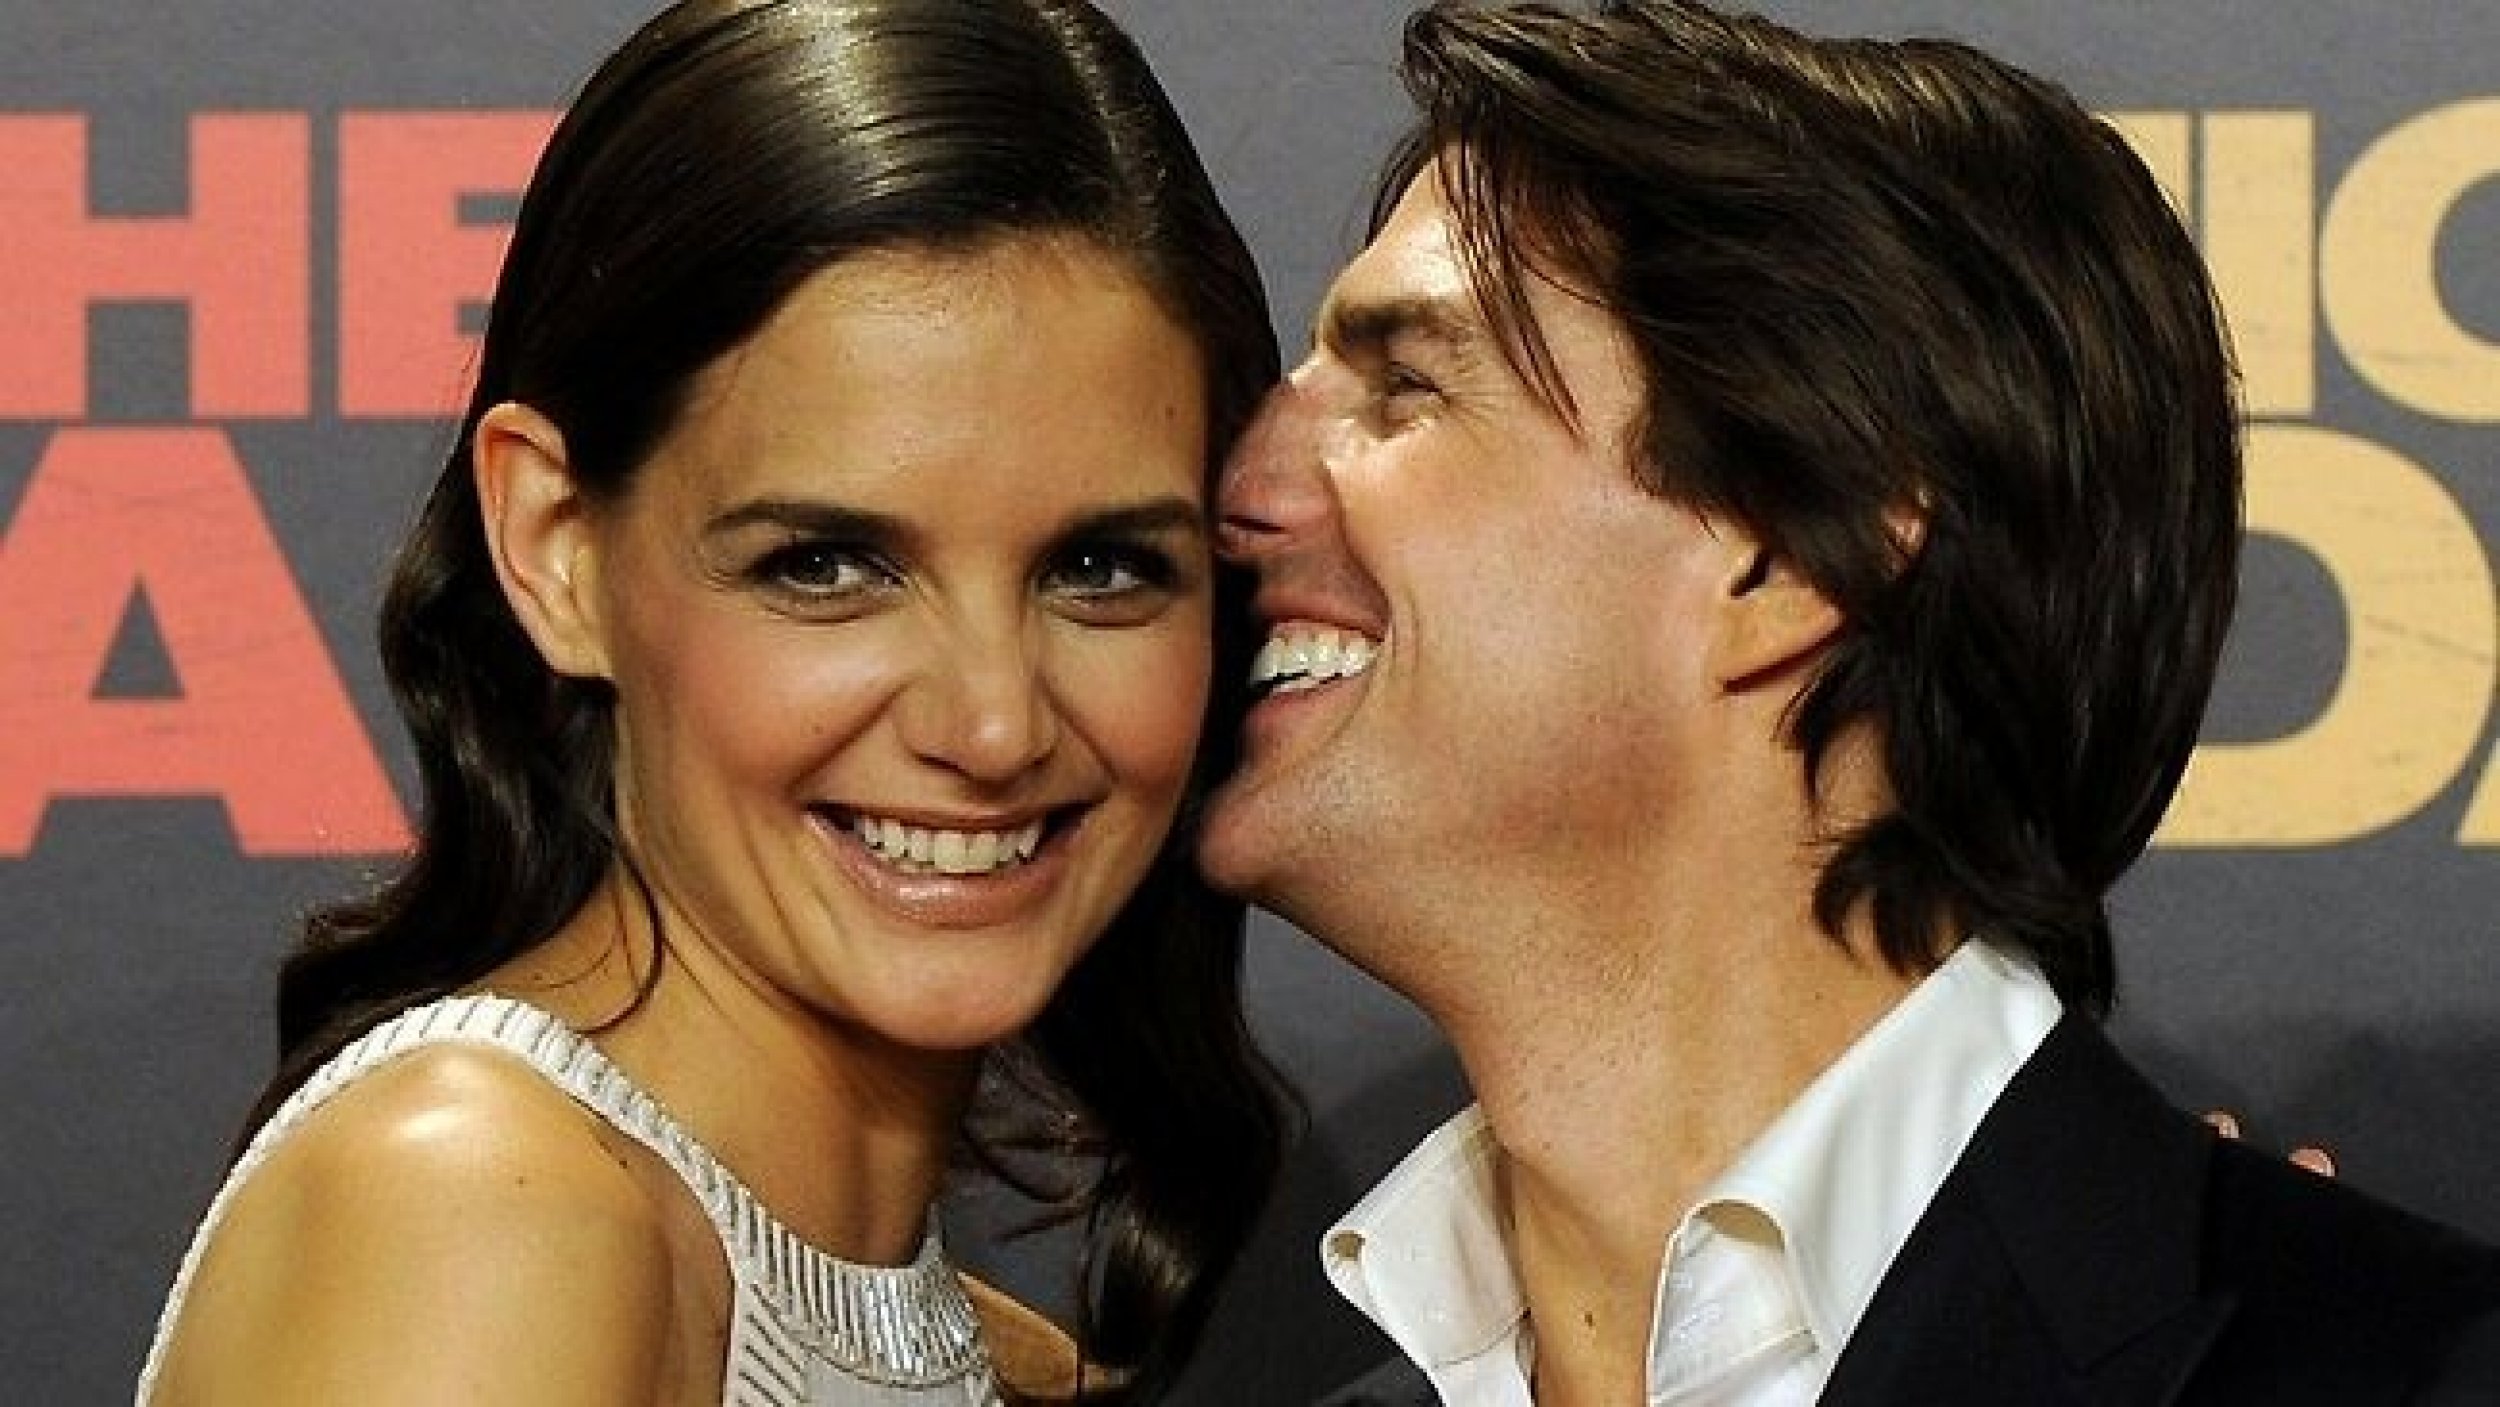 Hollywoods Most Shocking Splits From Tom Cruise  Katie Holmes to Johnny Depp  Vanessa Paradis